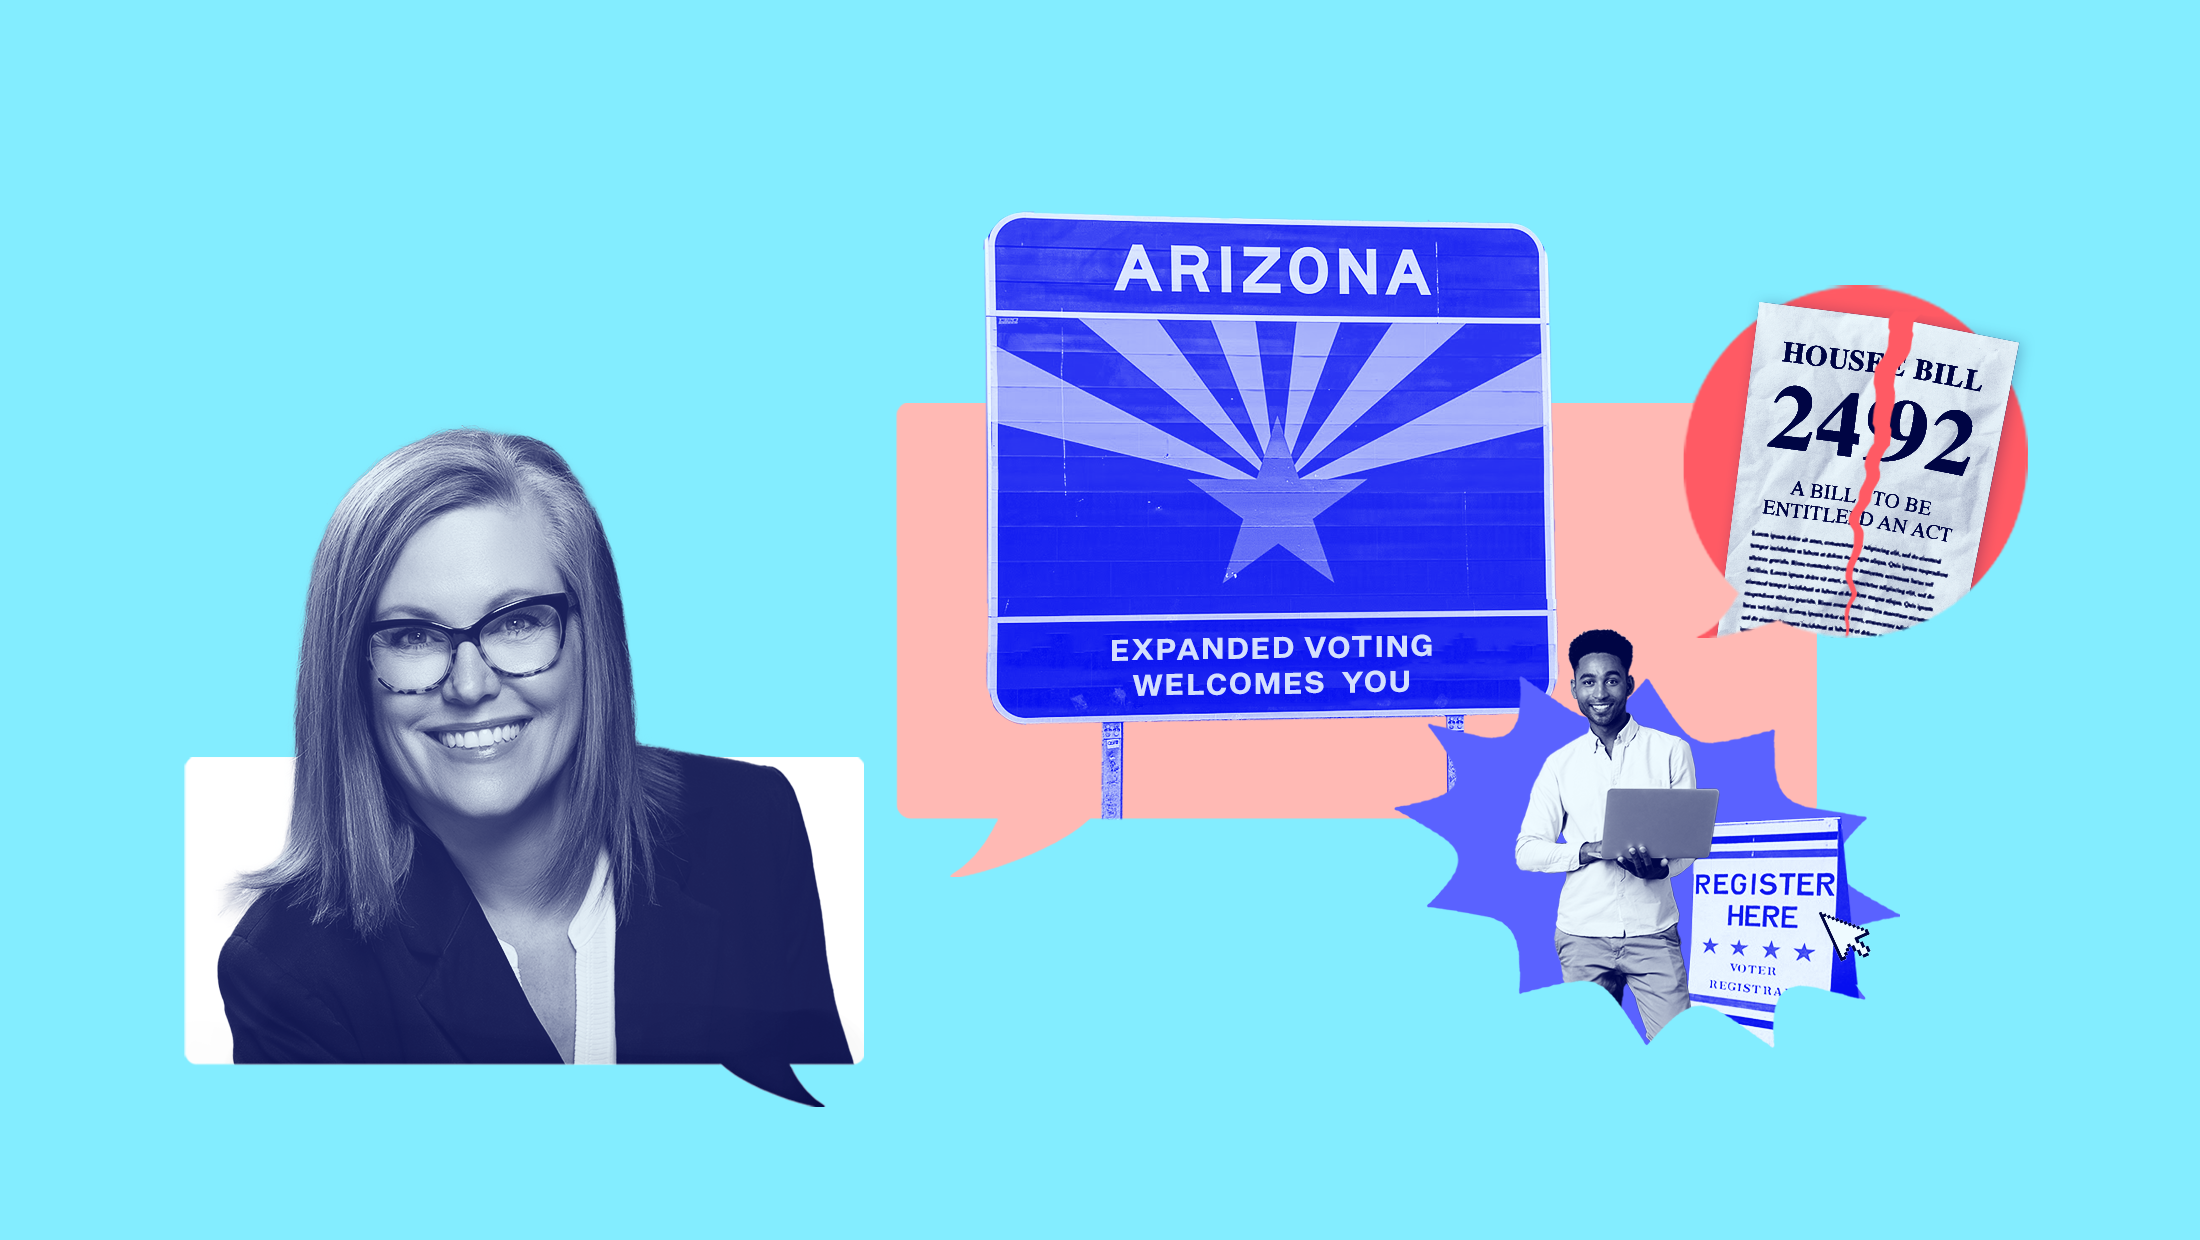 Light blue background with blue-toned image of Arizona gubernatorial candidate and Secretary of State Katie Hobbs (D), a sign that reads "Arizona EXPANDED VOTING WELCOMES YOU" an image of House Bill 2492 split into two, an image of someone holding a computer and an image of a sign that reads "REGISTER HERE VOTER REGISTRATION" with a cursor pointed over it.